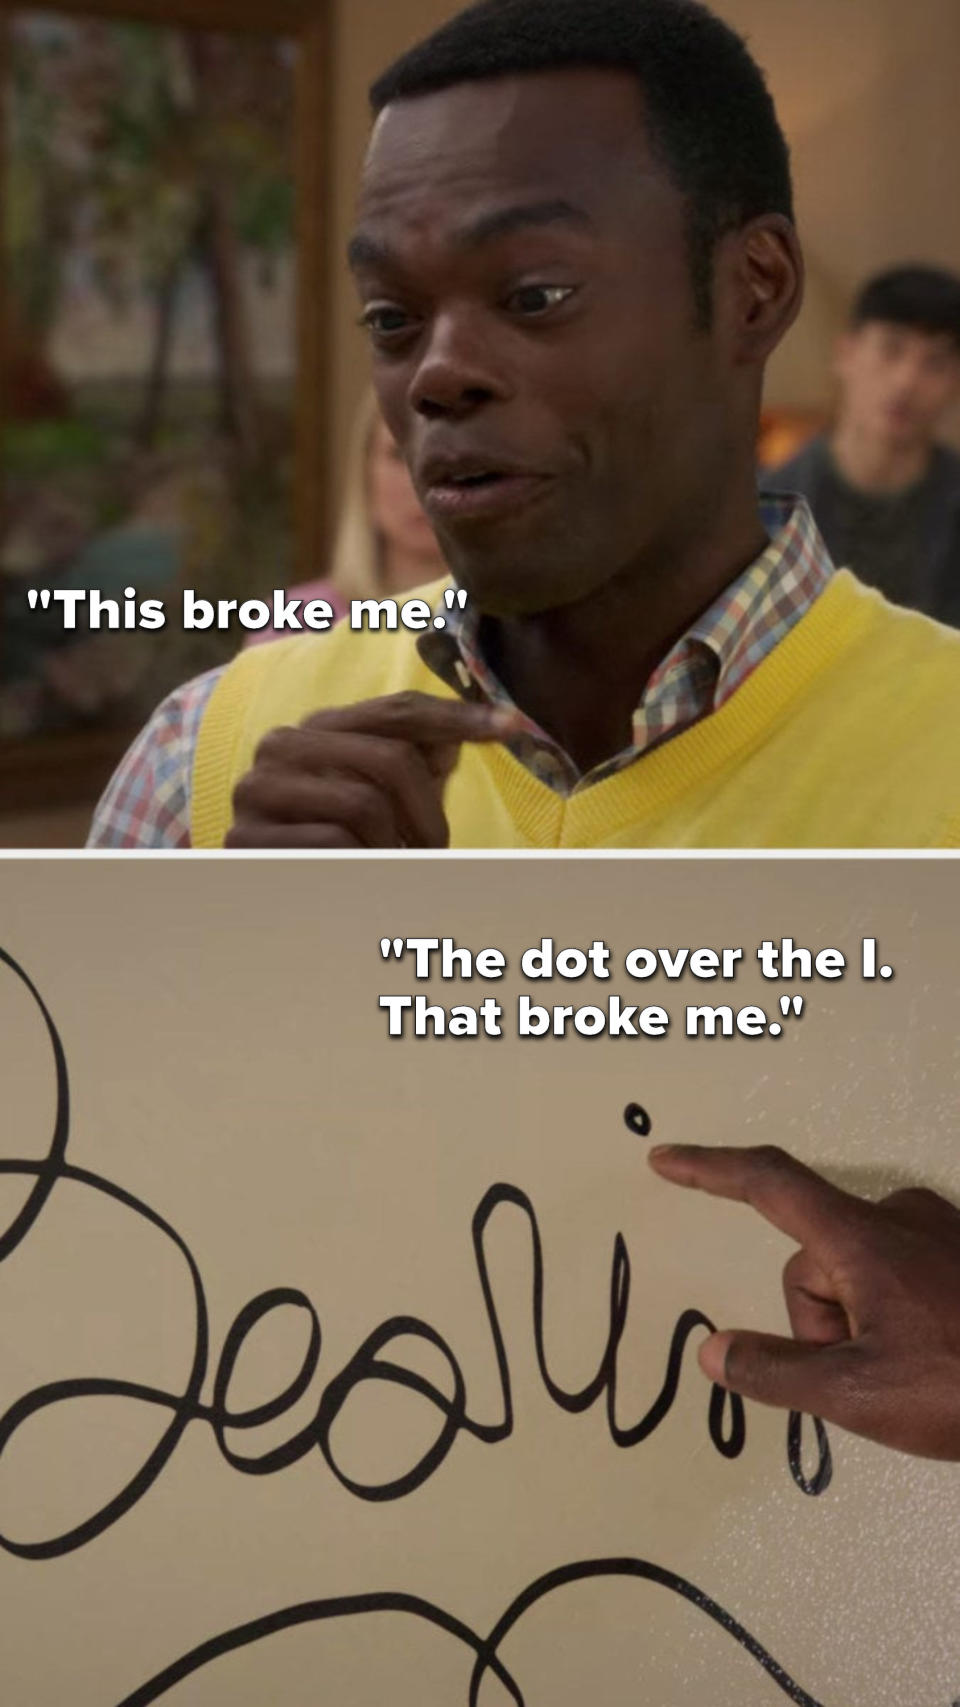 Chidi says, "This broke me, the dot over the I, that broke me"